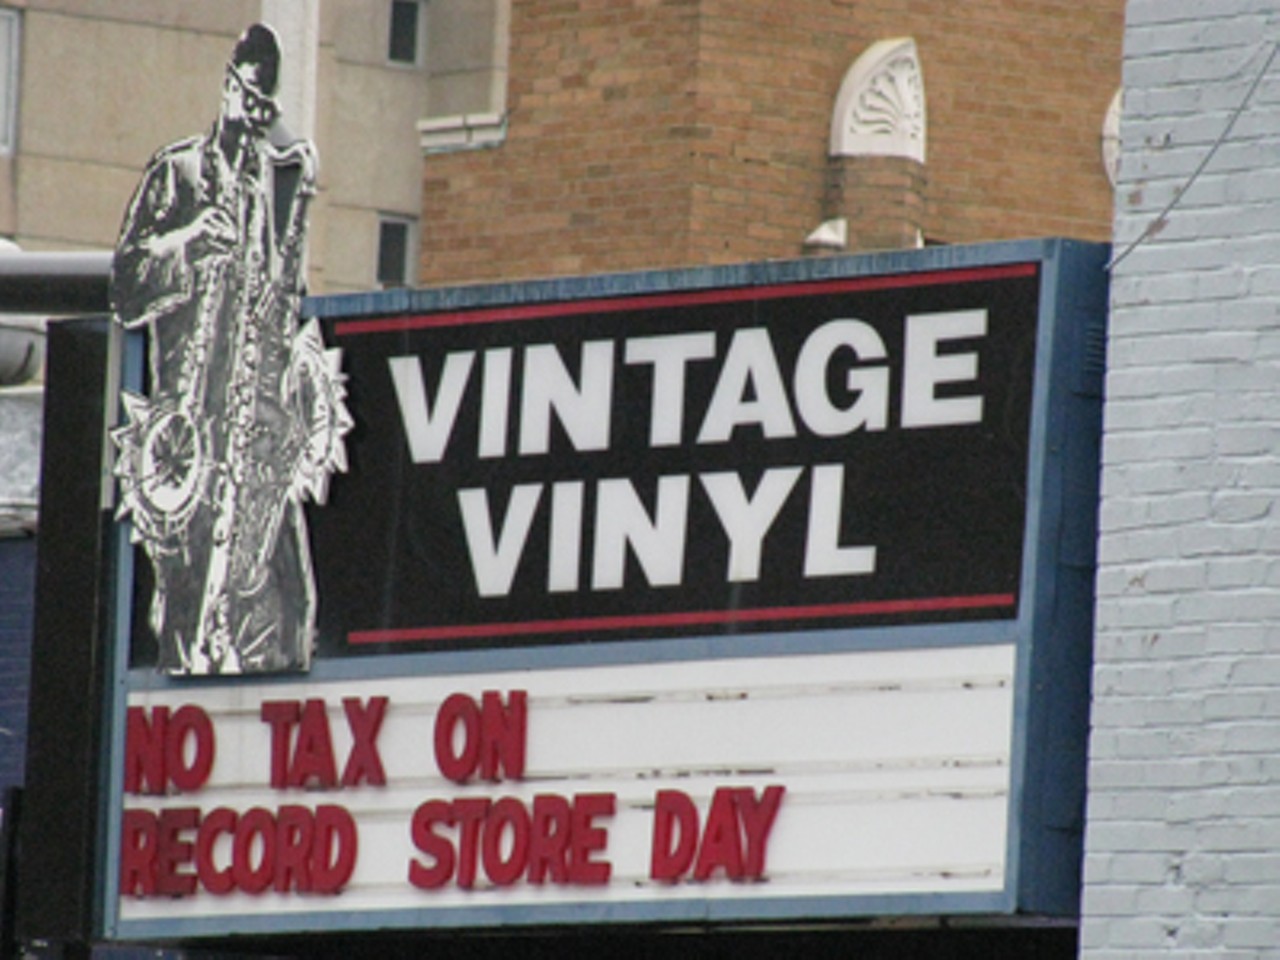 Vintage Vinyl enticed customers with no sales tax on purchases.